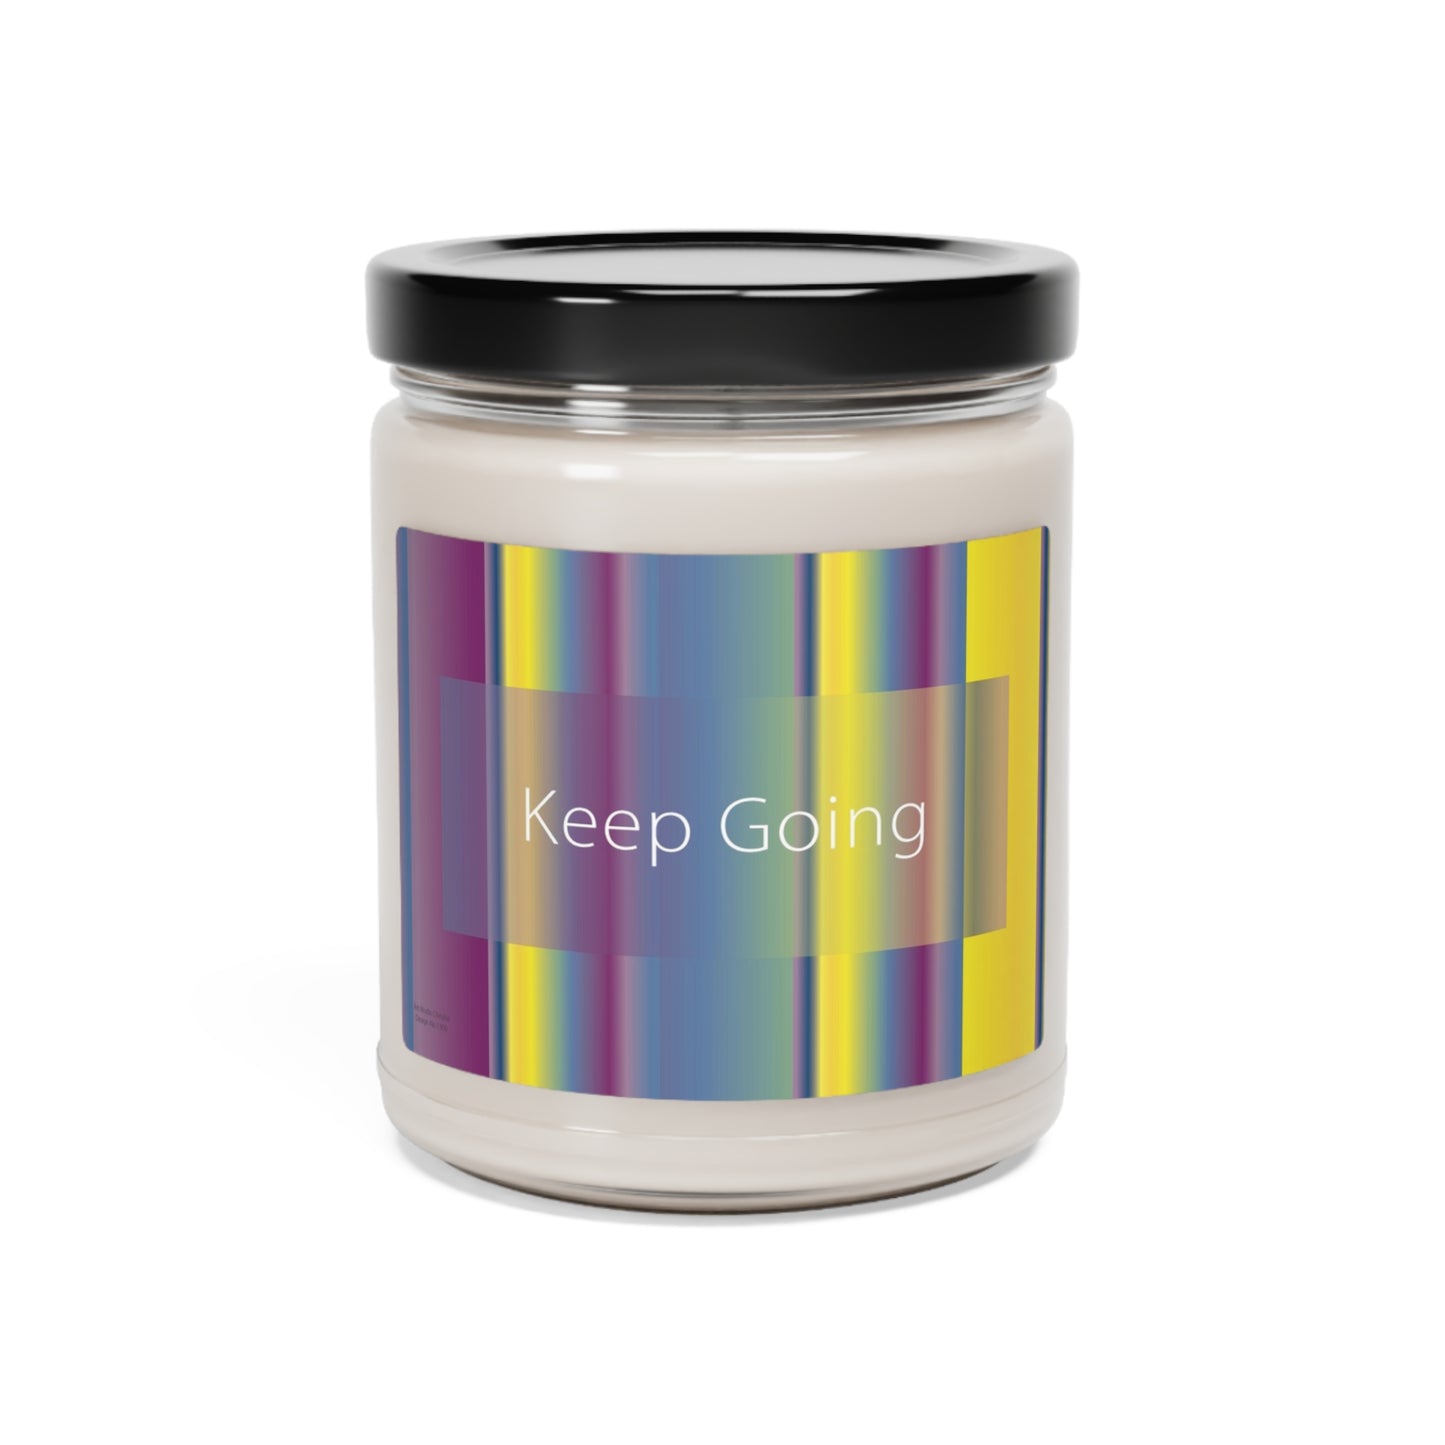 Scented Soy Candle, 9oz Keep Going - Design No.1300